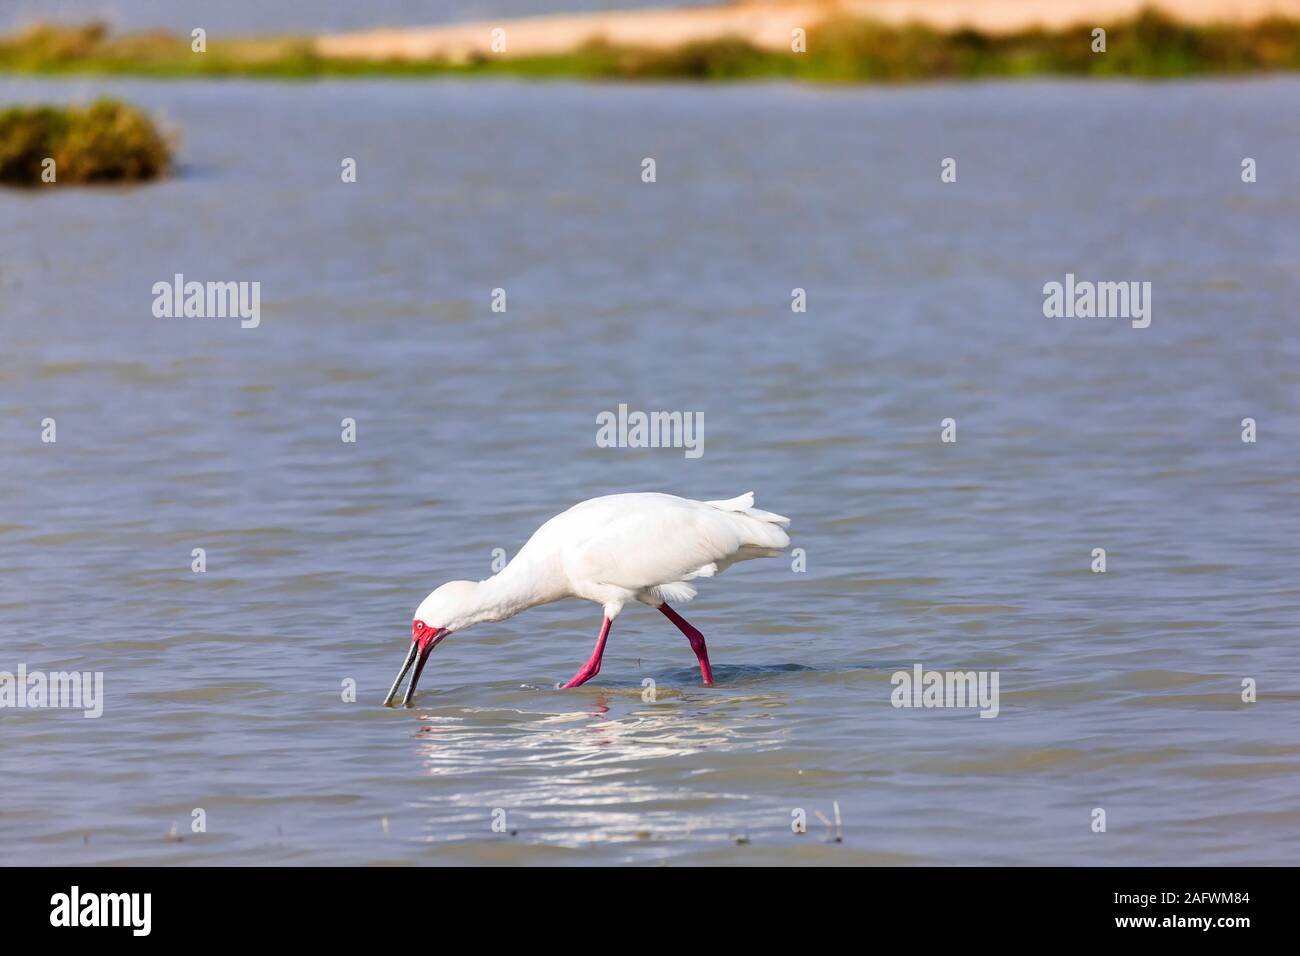 African Spoonbill hunting fishes in river, Moremi game reserve, Okavango delta, Botswana, Southern Africa, Africa Stock Photo